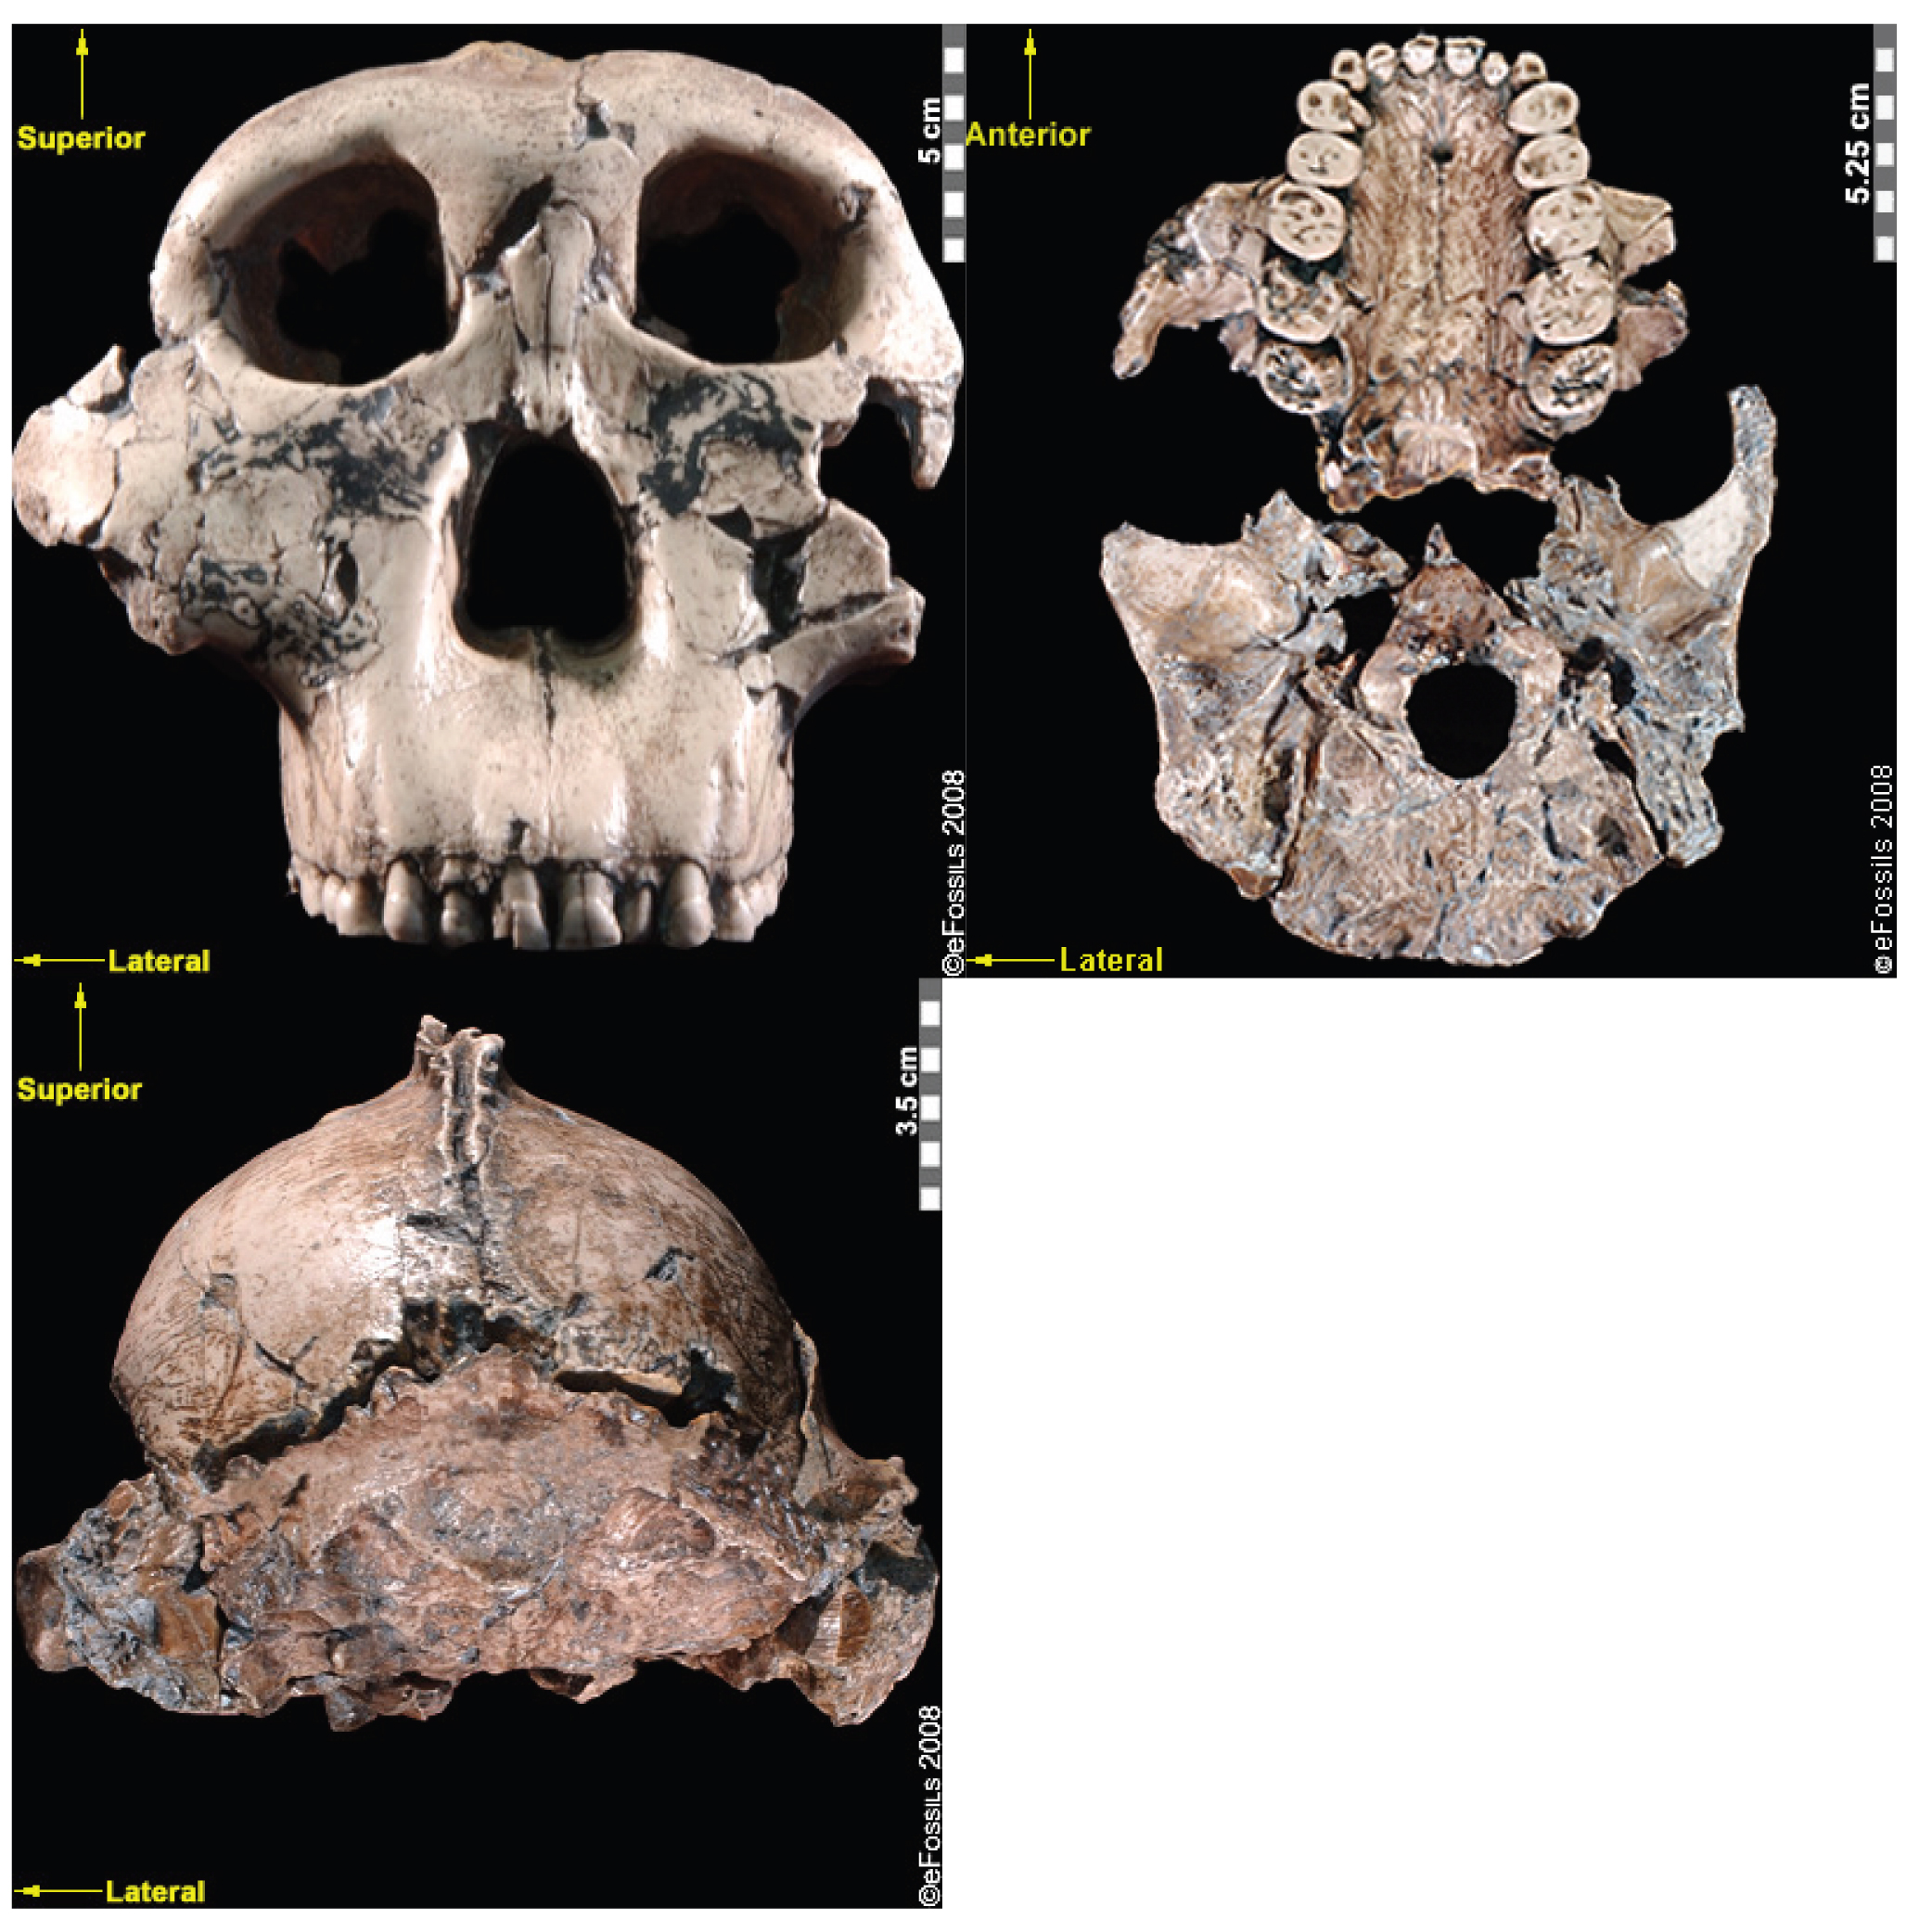 Three views of an ancient skull are shown on a black background.